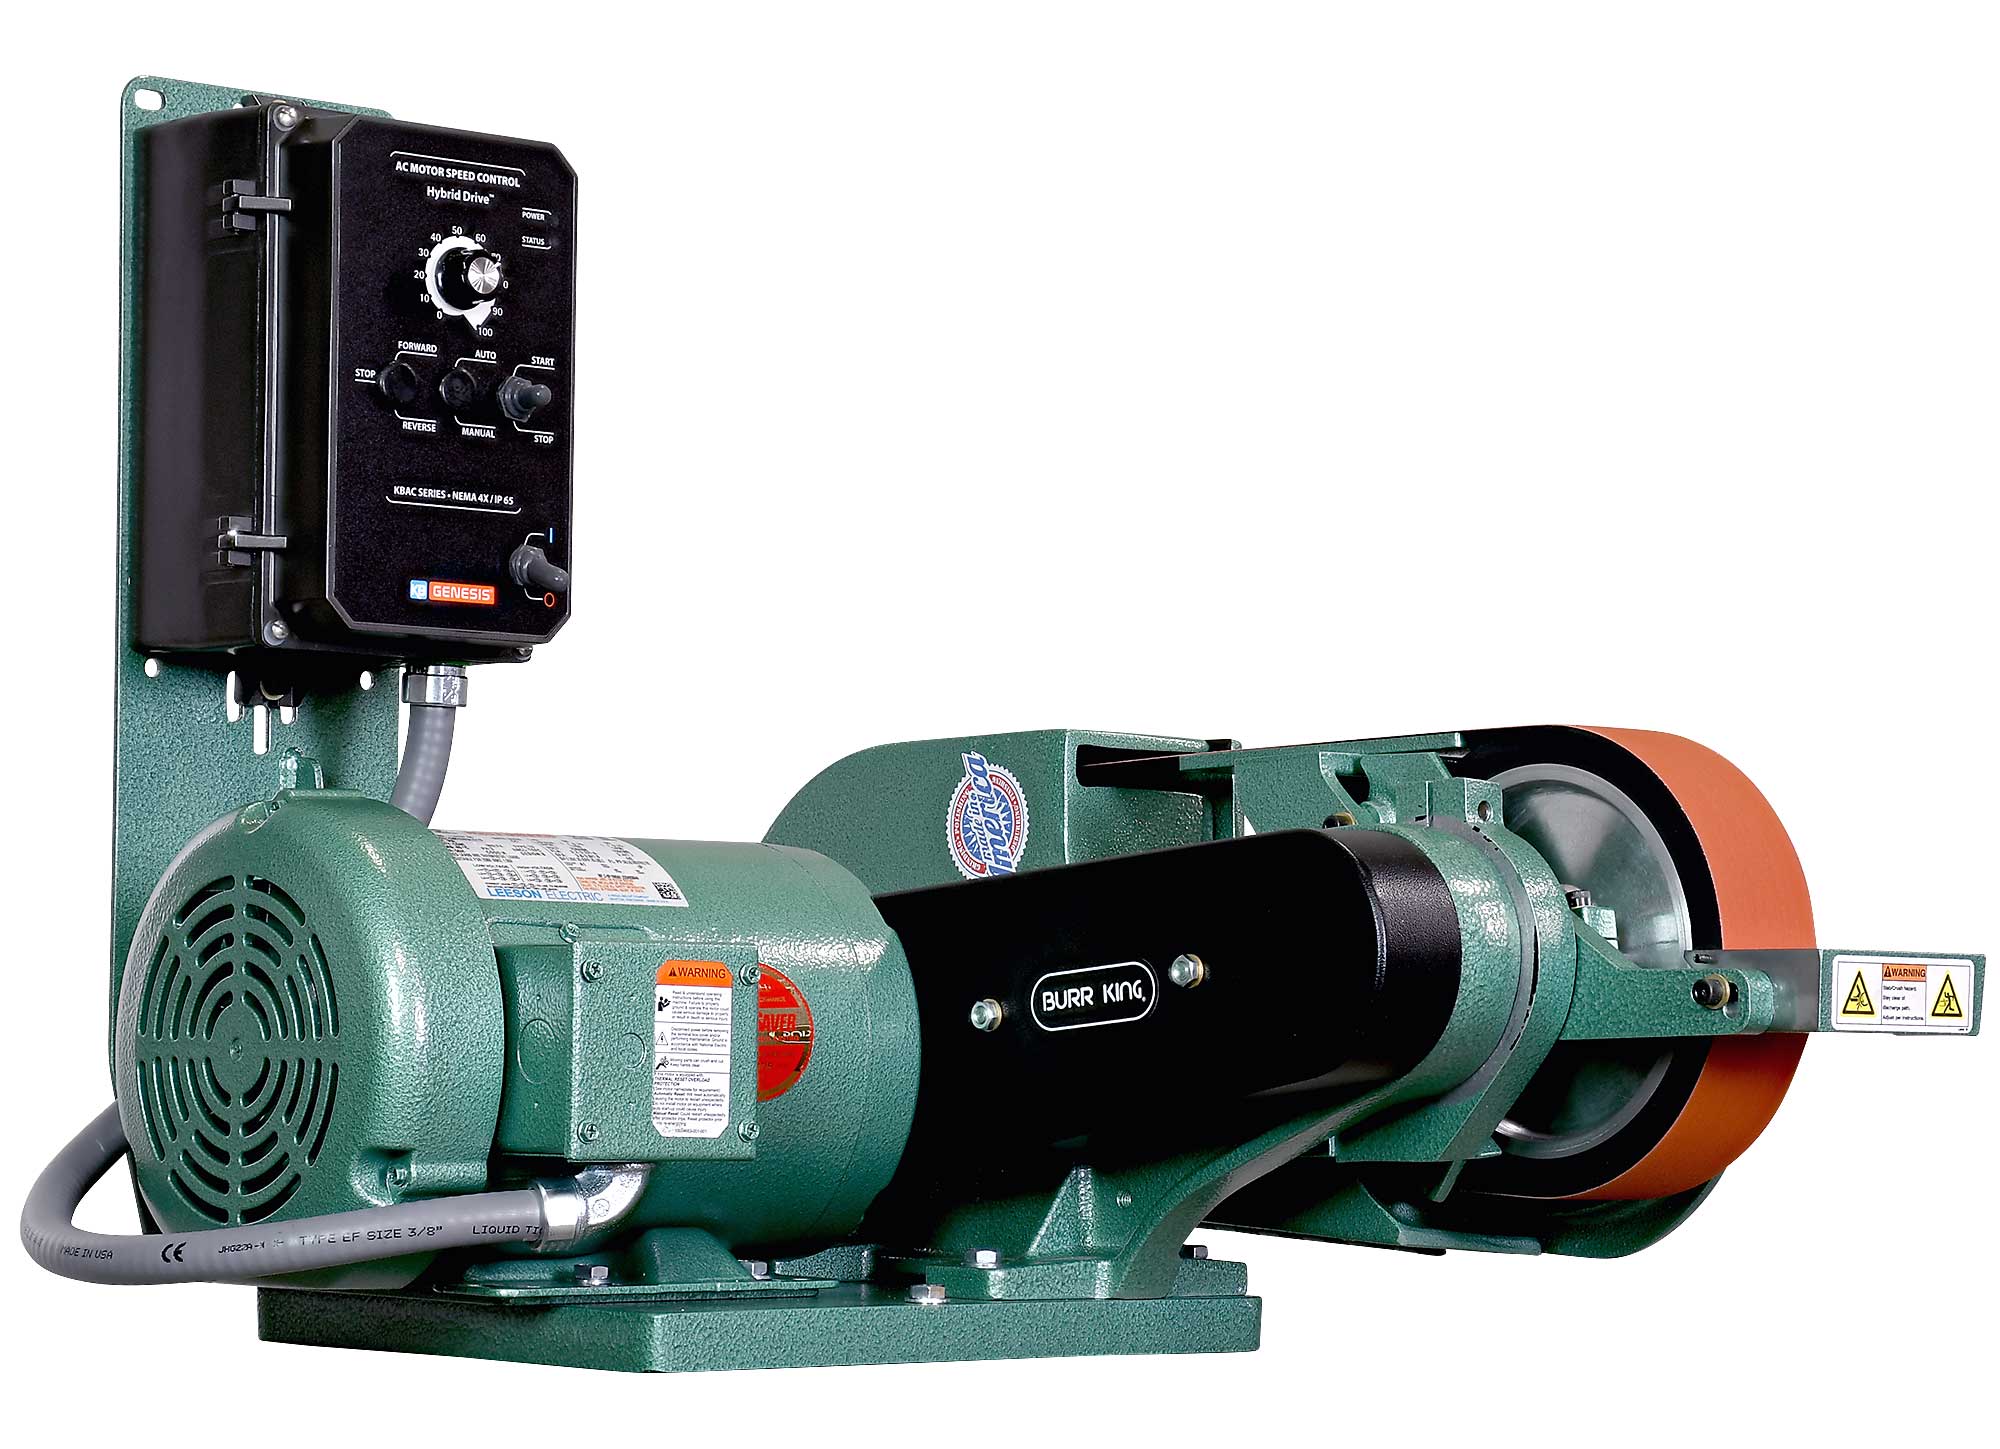 24821 - X400 variable speed belt grinder.  The X400 grinding head can be easily positioned from vertical to horizontal.  